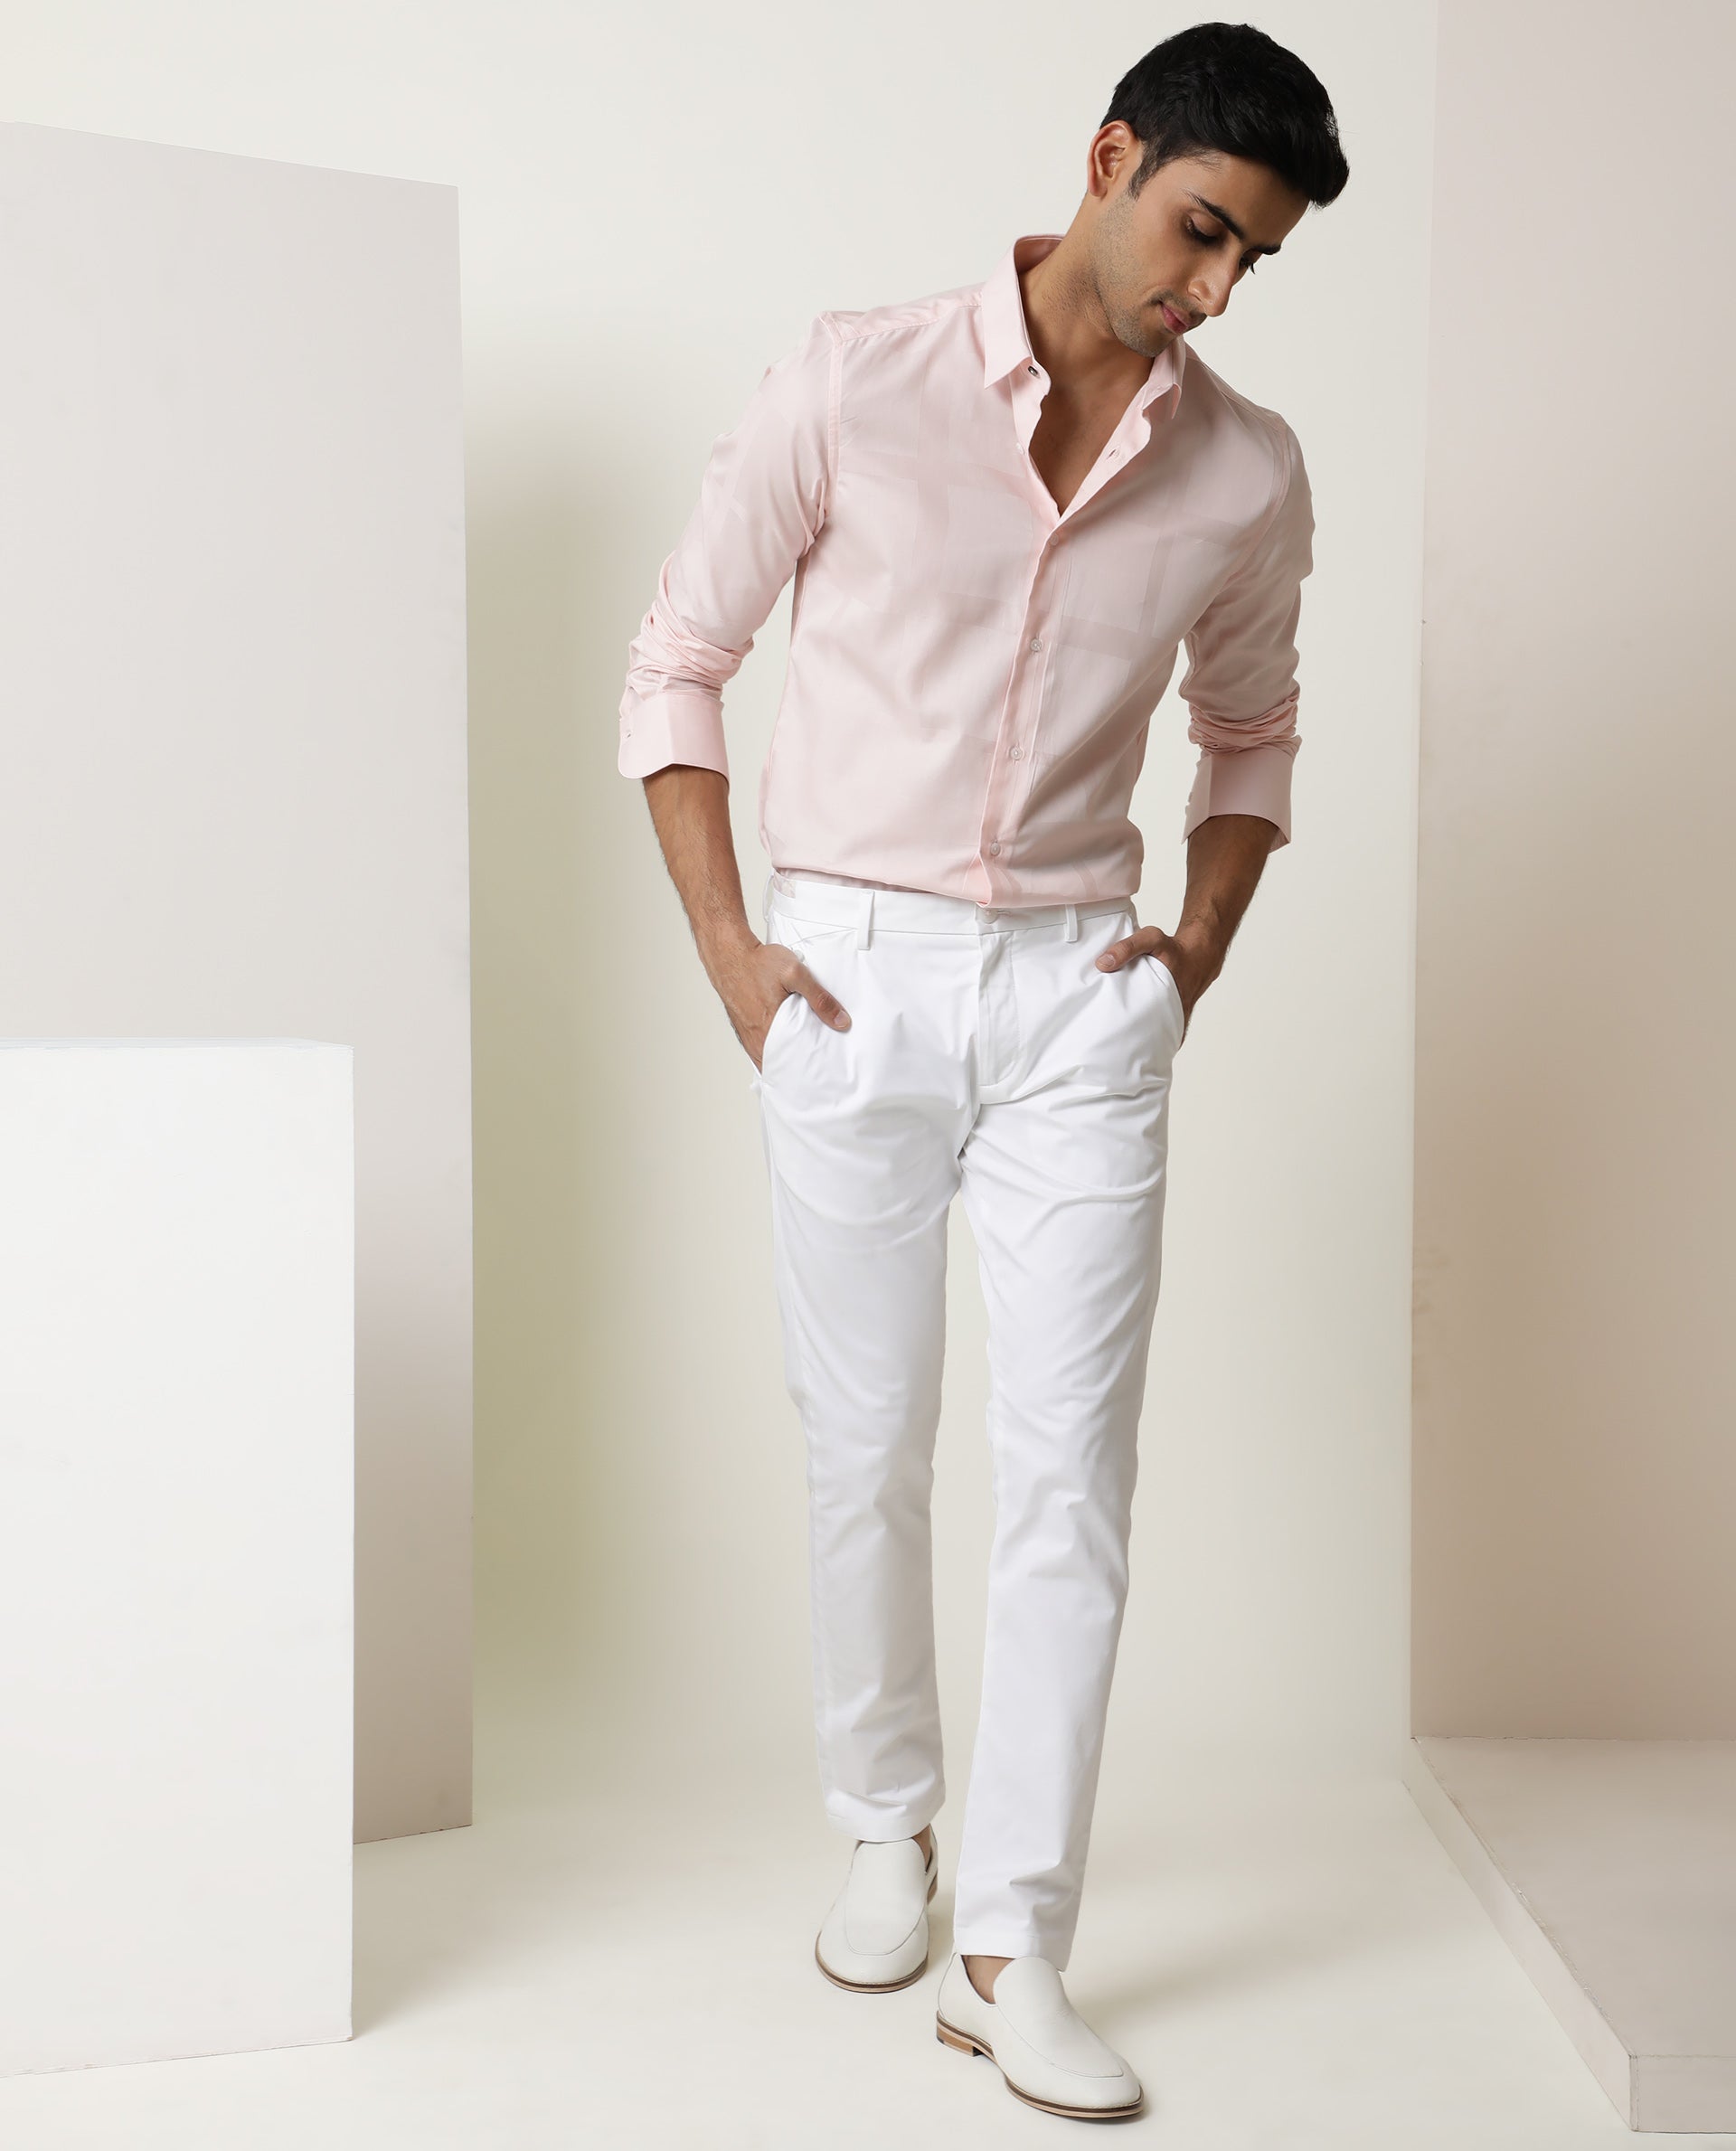 What color shirt goes well with white pants for men  Quora